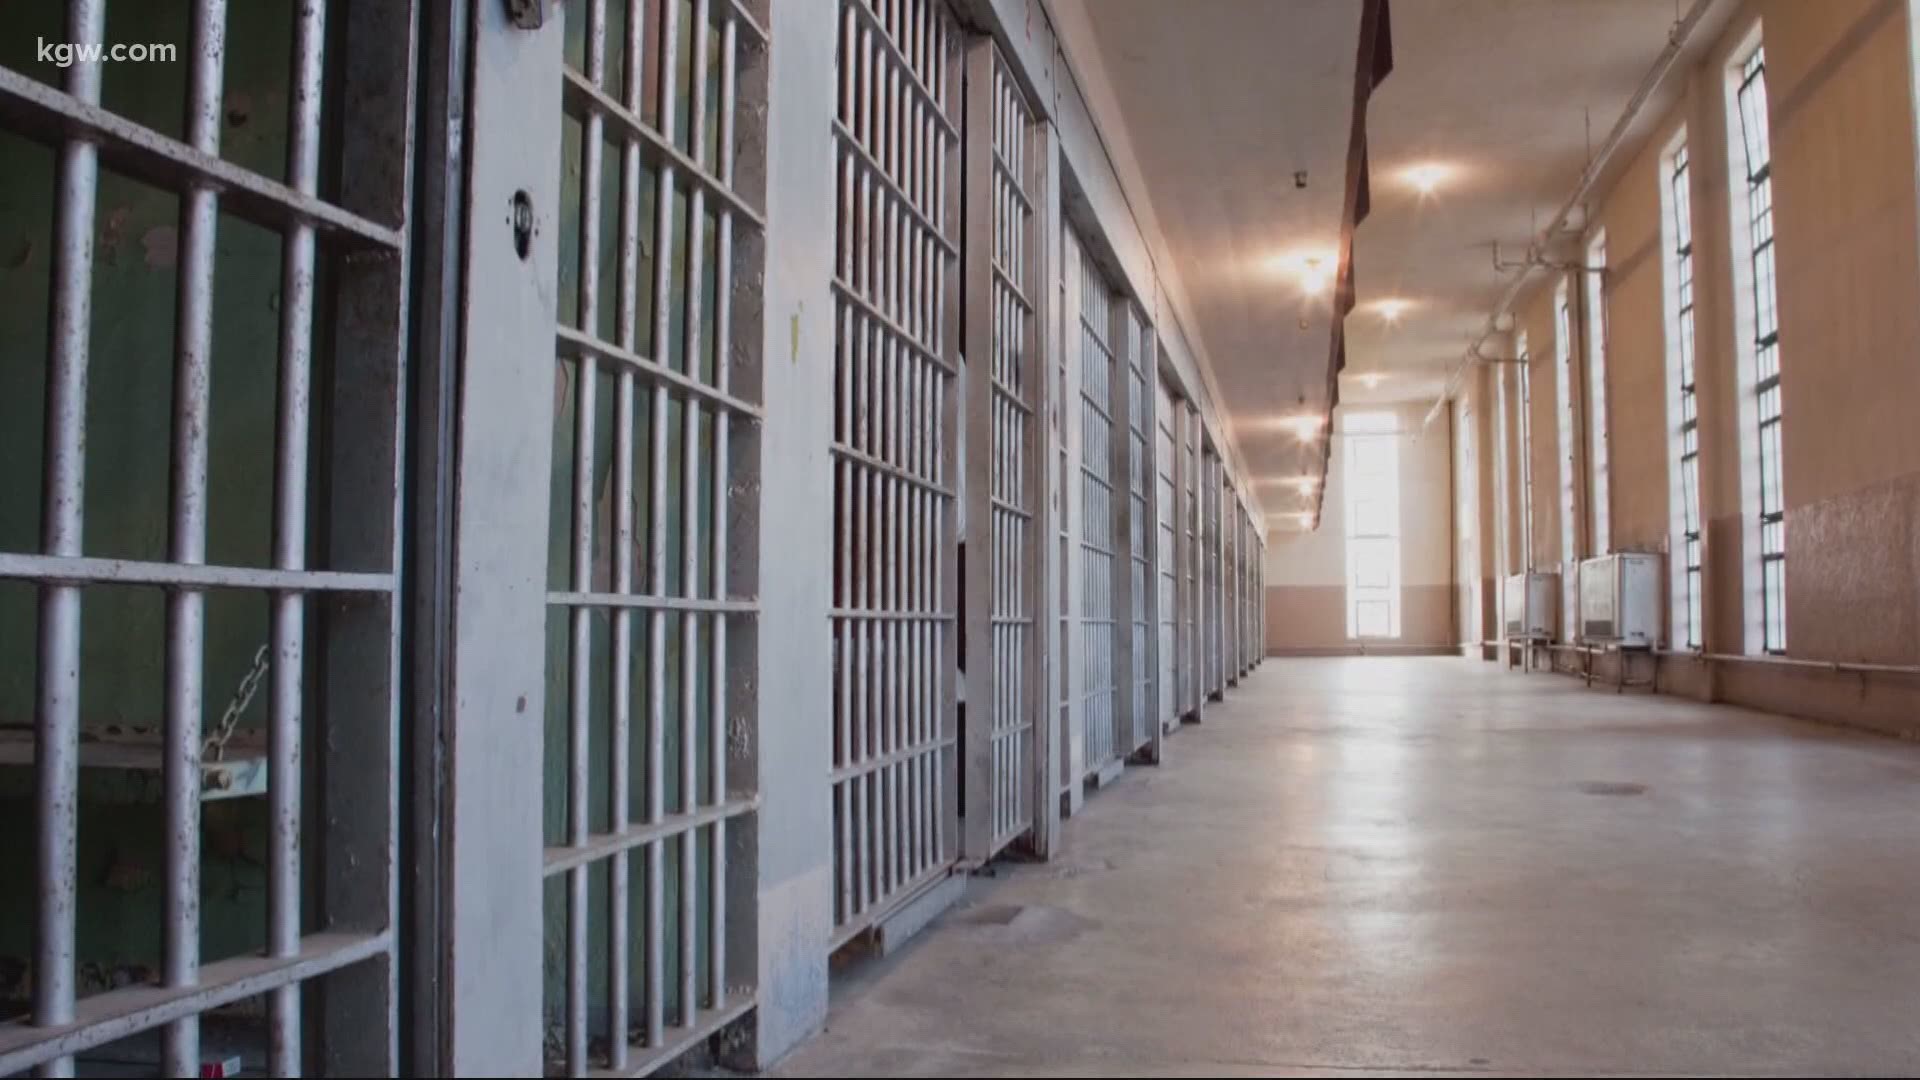 The Department of Corrections says nearly 100 inmates qualify for possible release.